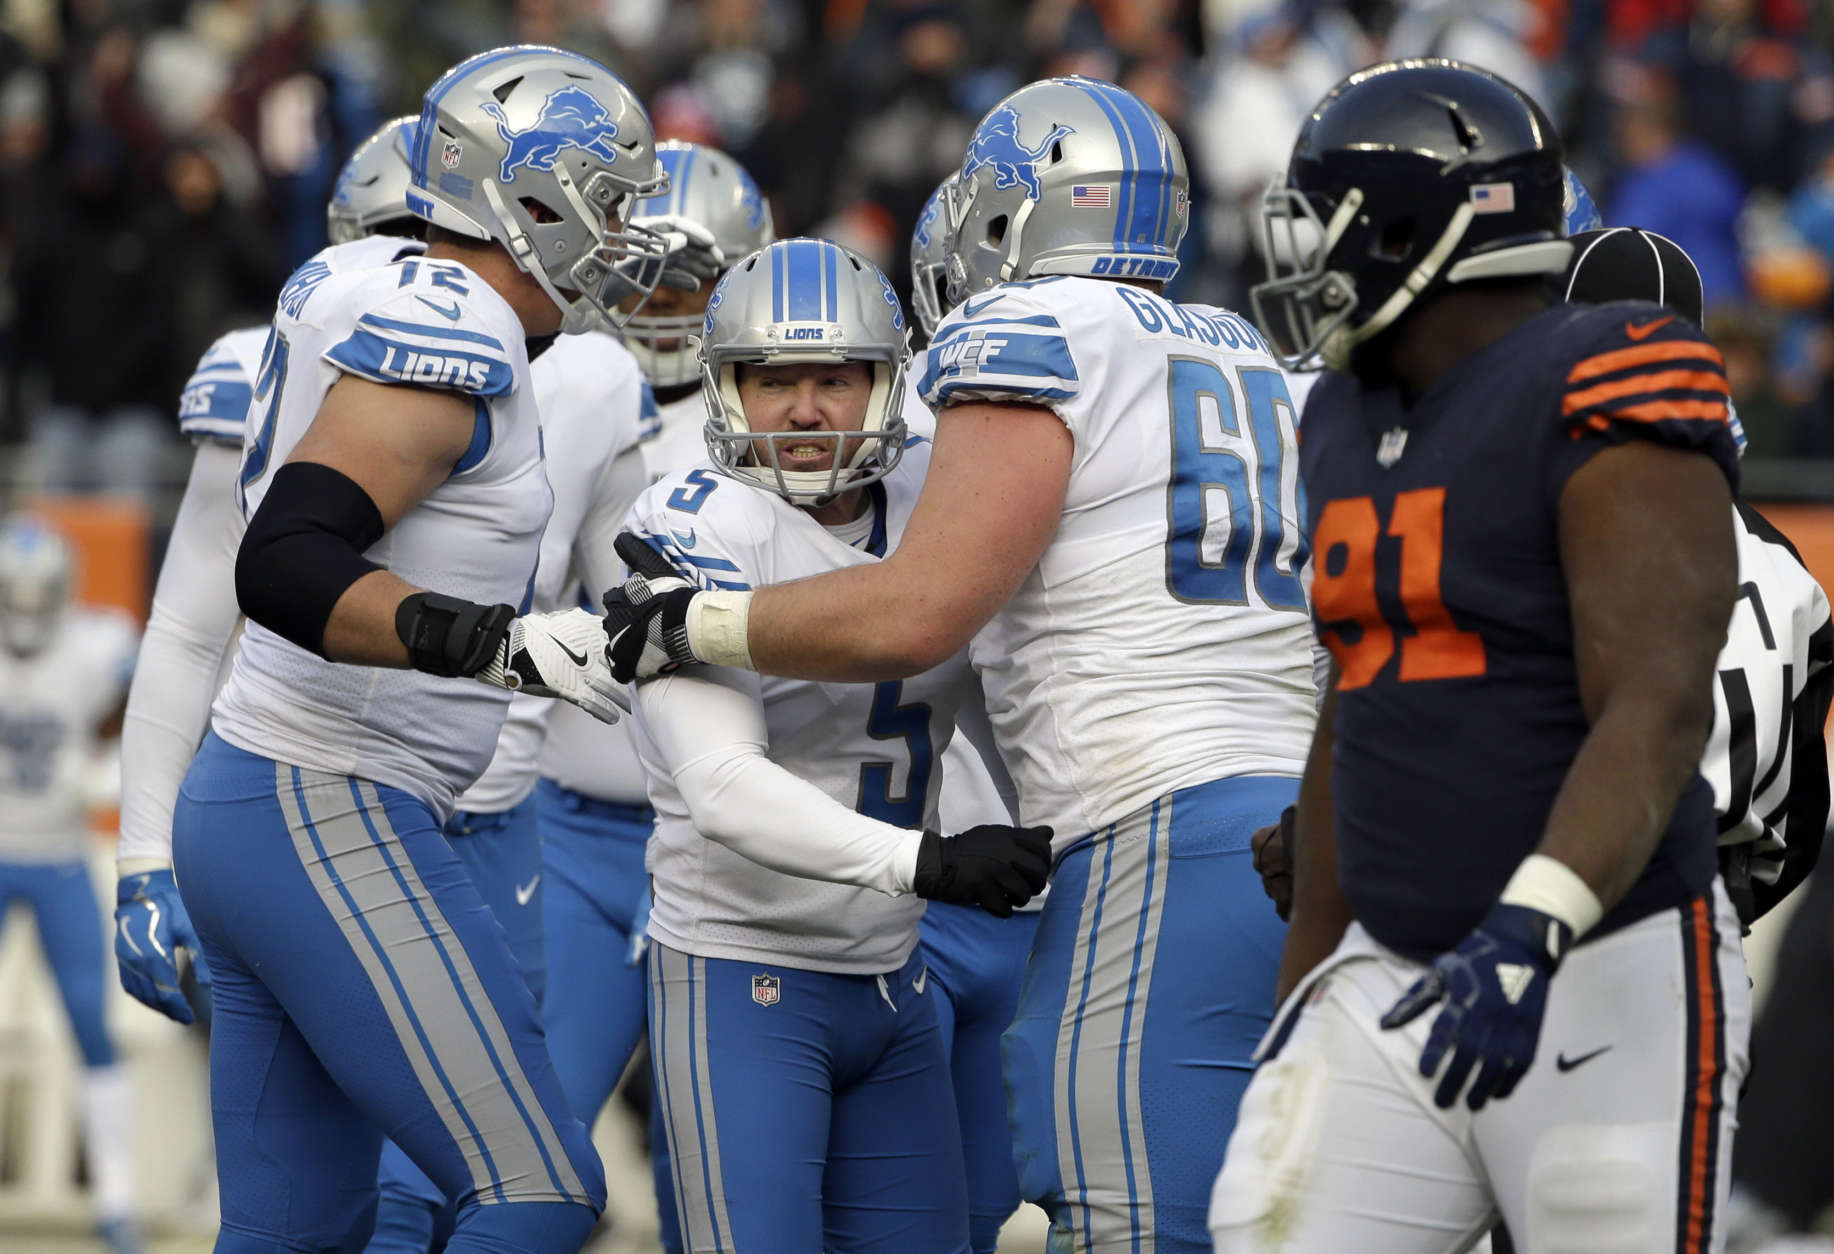 Detroit Lions kicker Matt Prater (5) celebrates his 52-yeard field goal during the second half of an NFL football game against the Chicago Bears, Sunday, Nov. 19, 2017, in Chicago. (AP Photo/Nam Y. Huh)